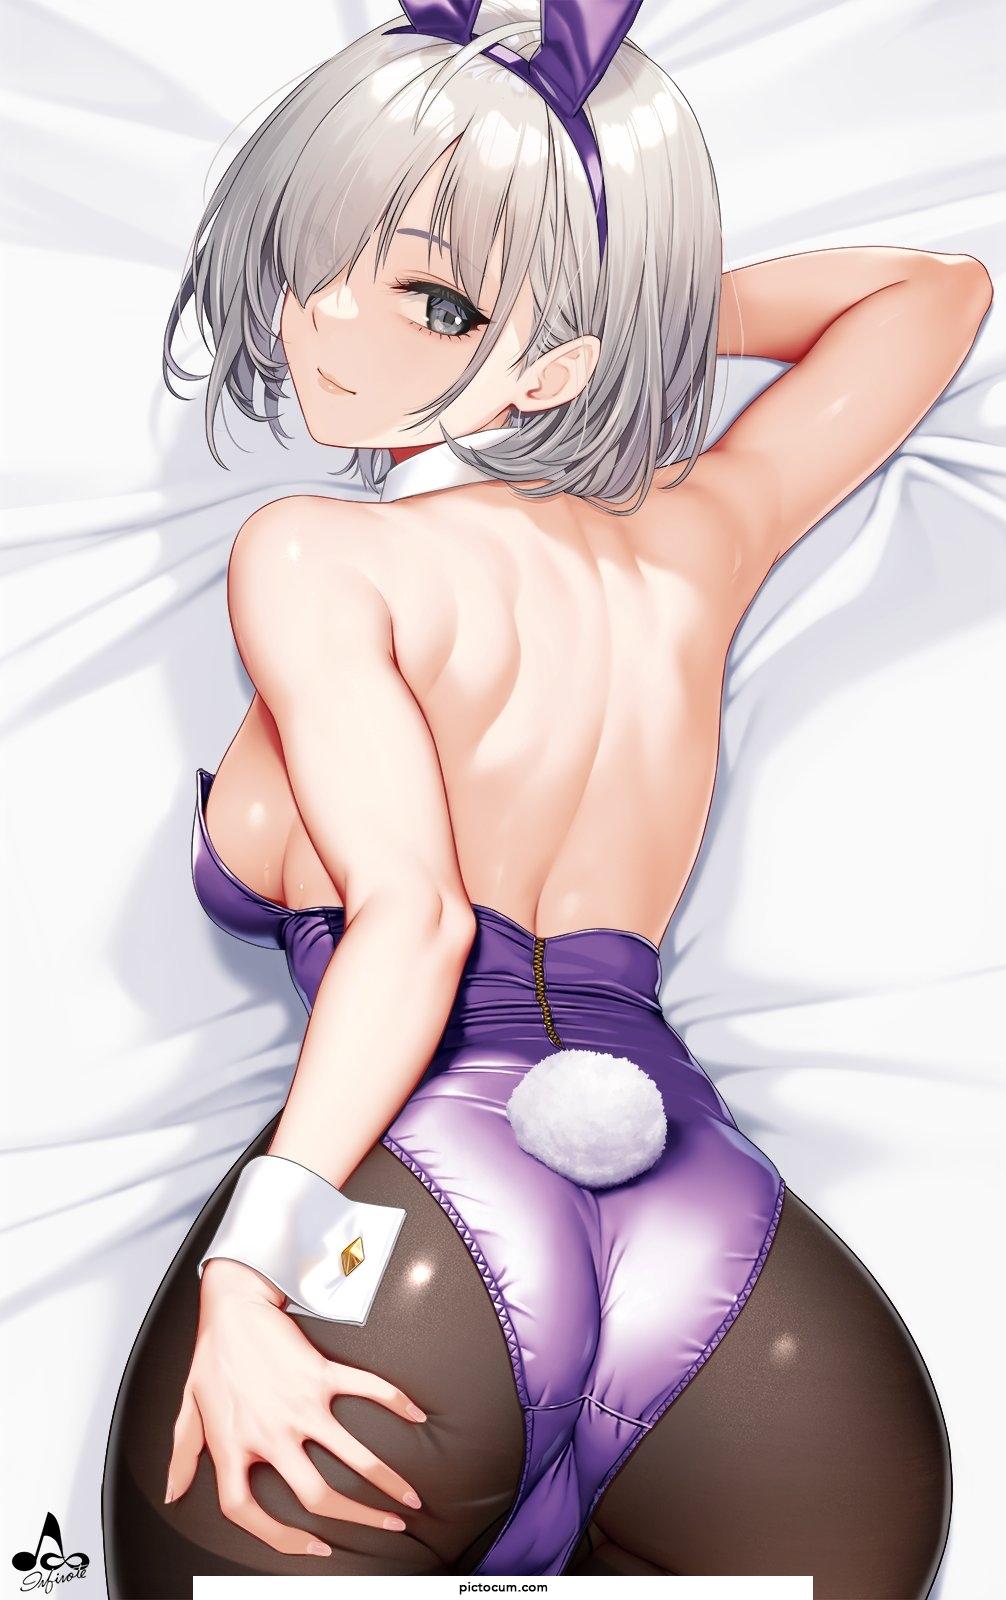 Silver-Haired Bunny